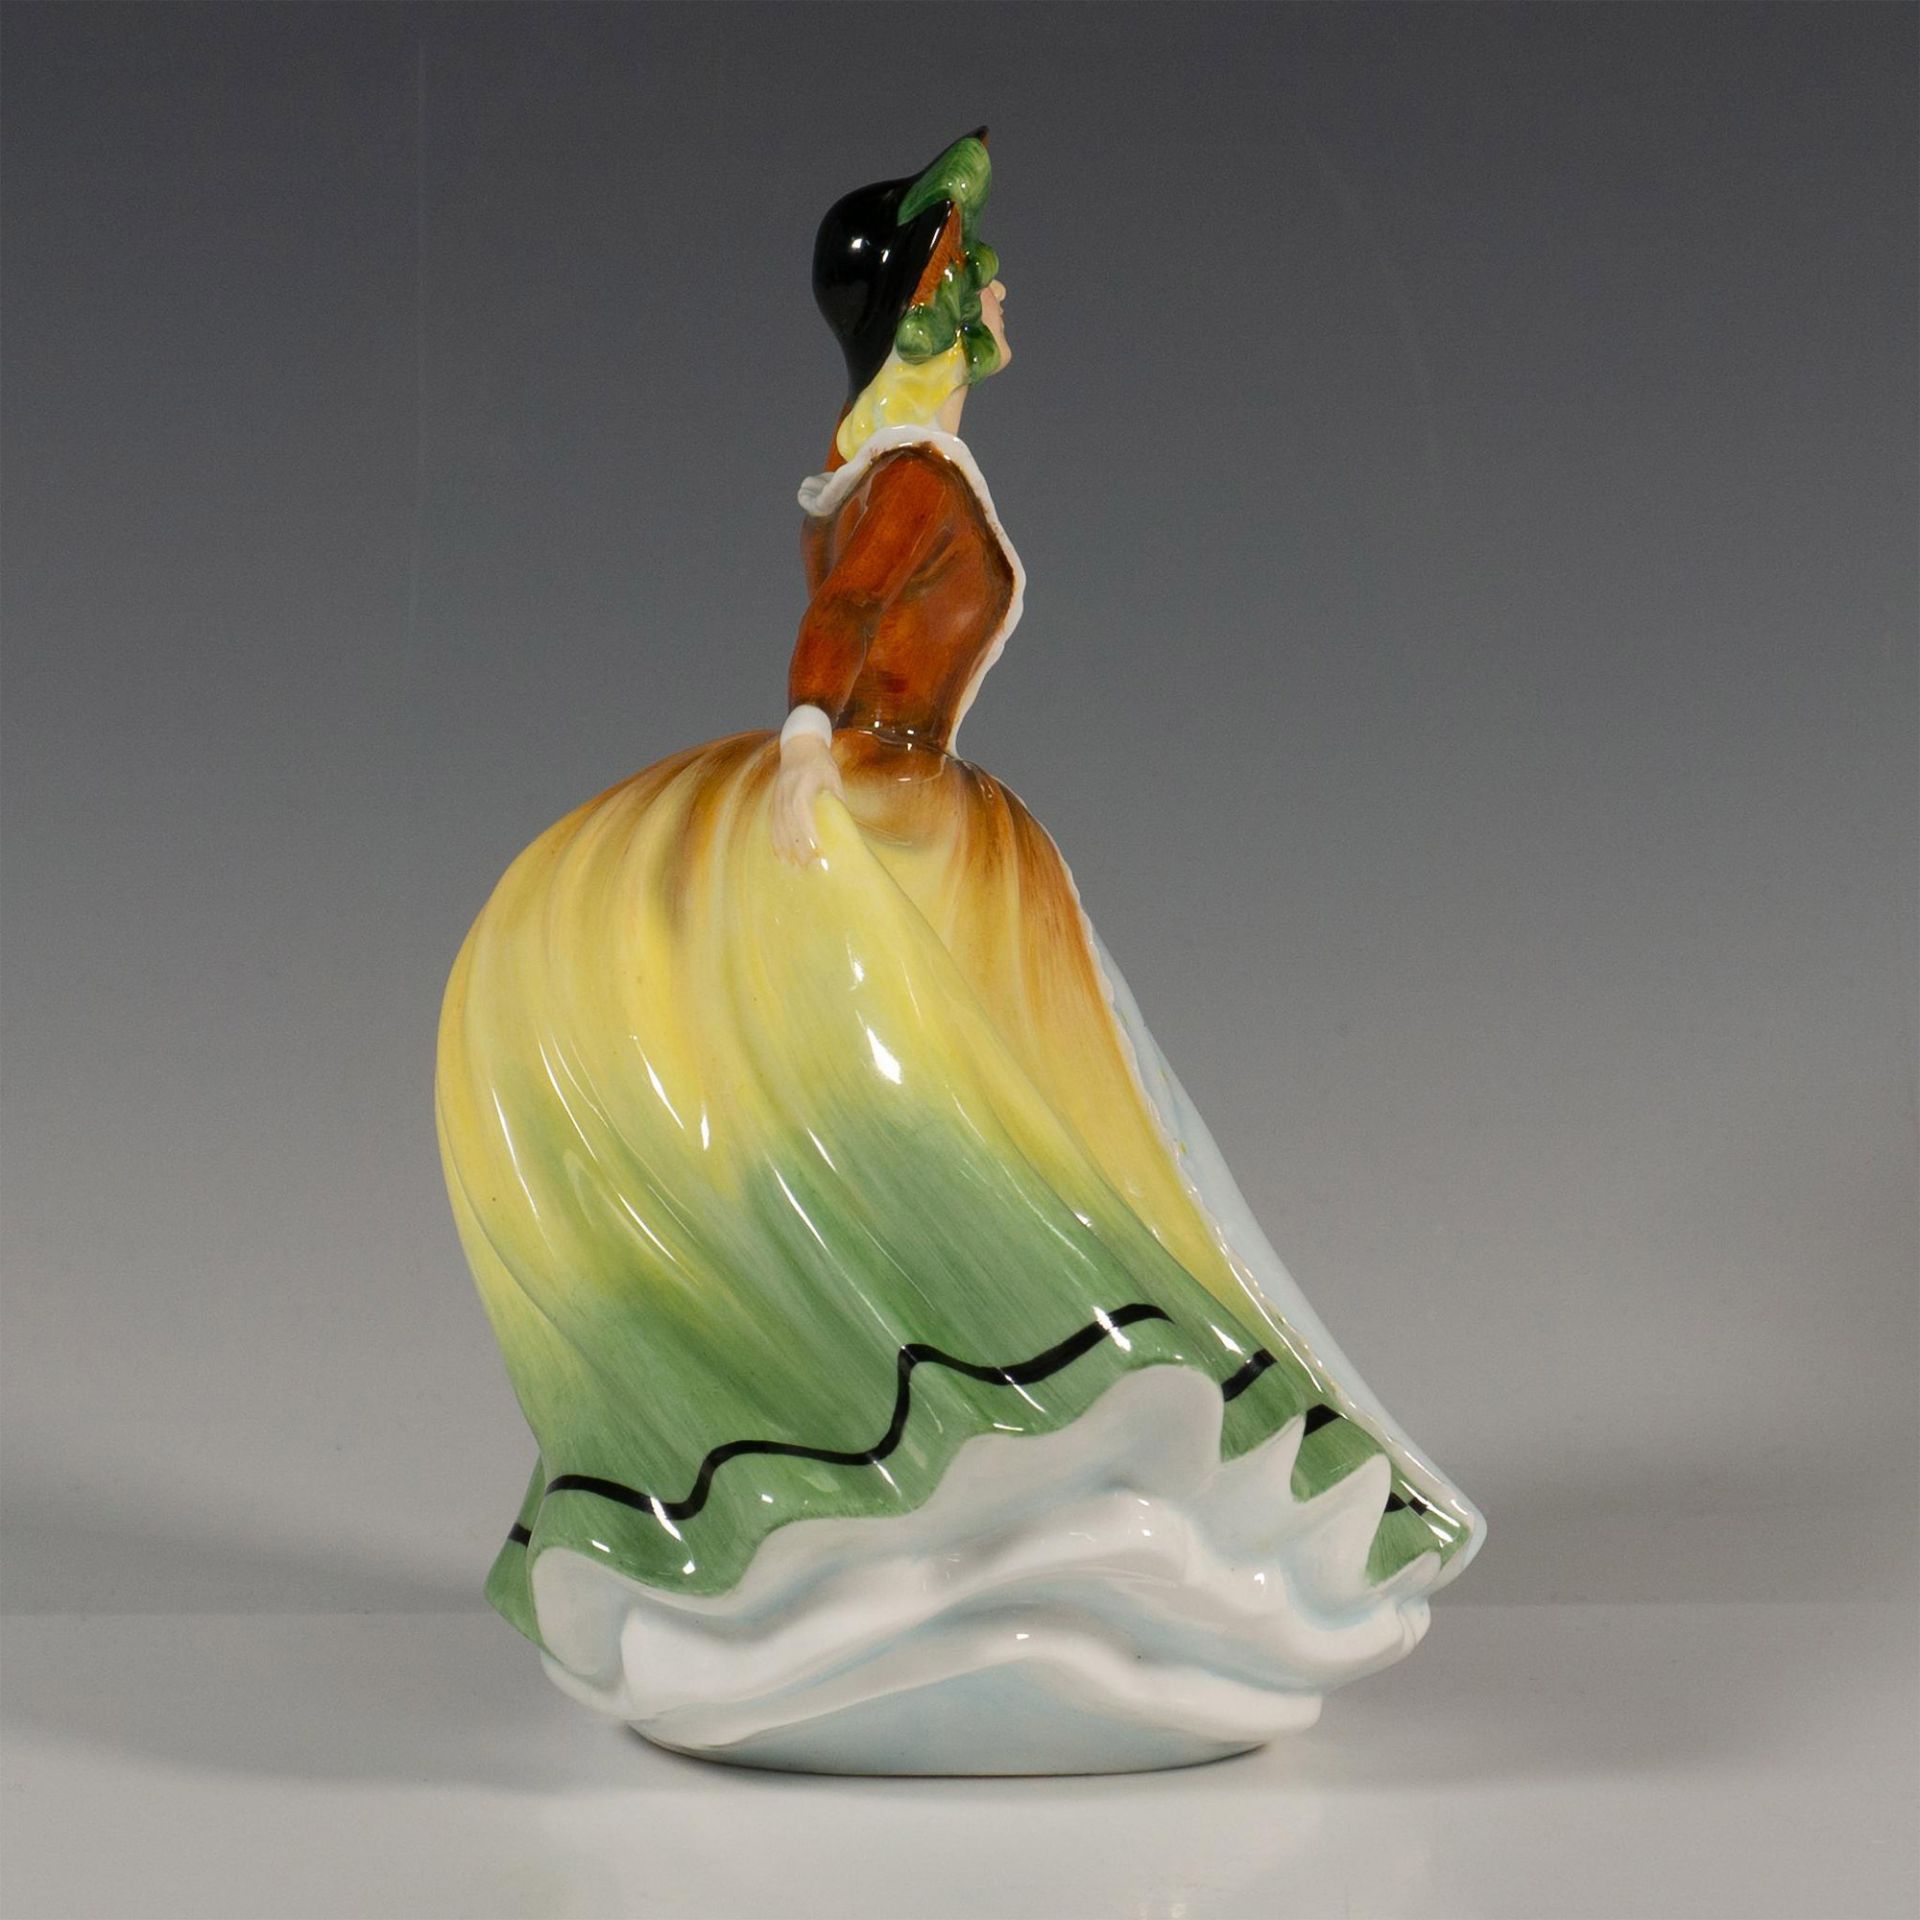 Mary HN3903, Colorway - Royal Doulton Figurine - Image 2 of 4